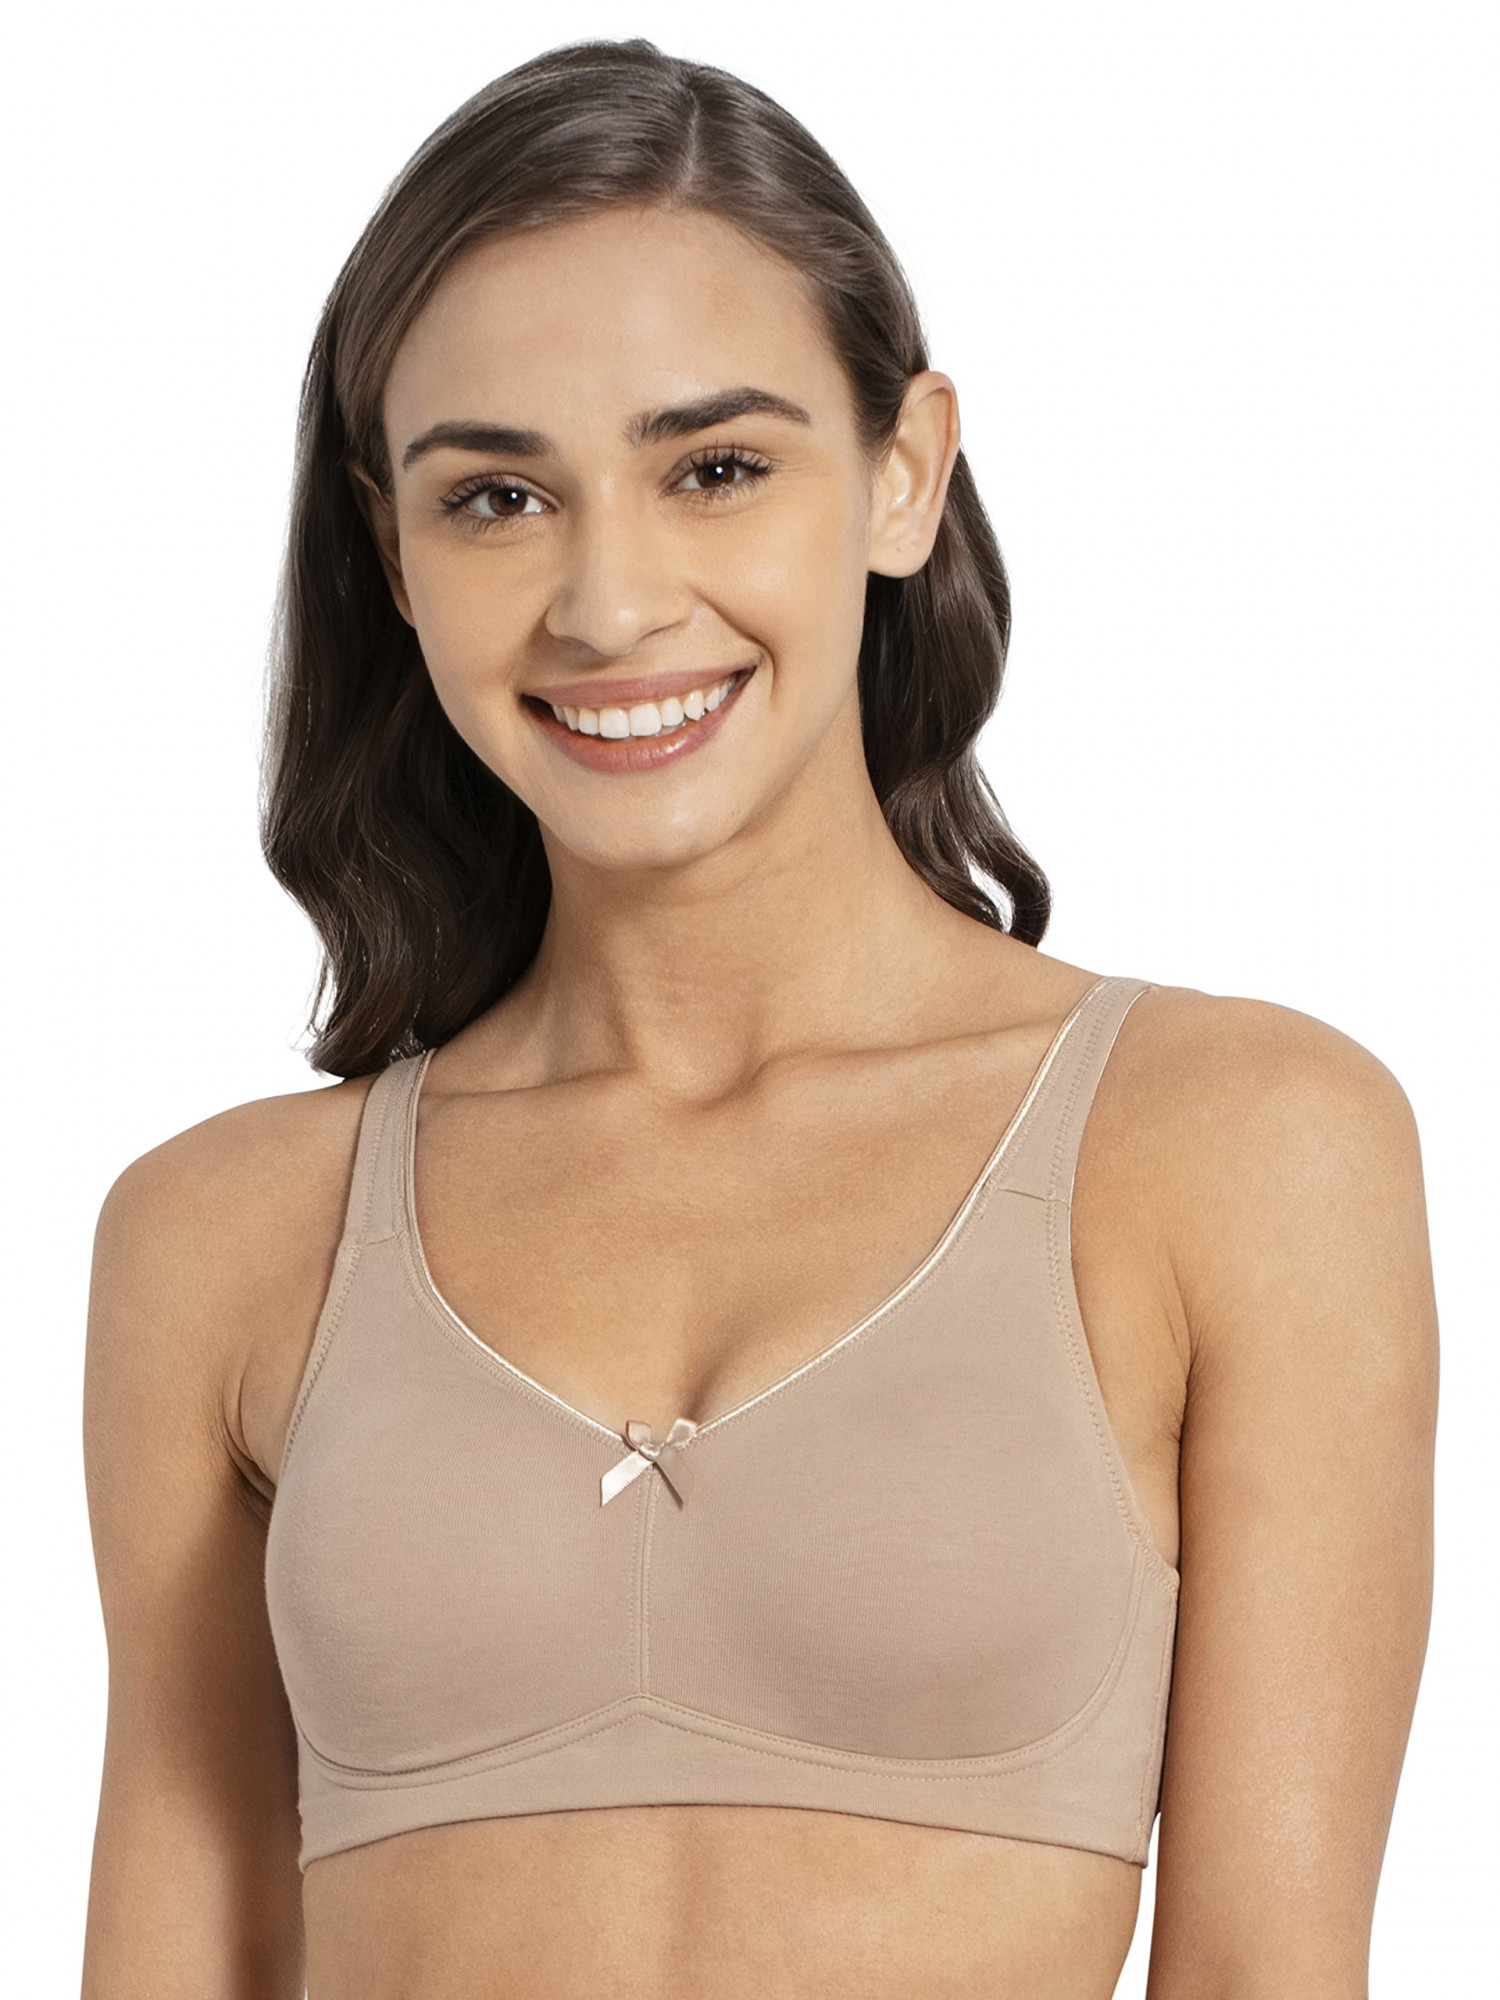 https://www.fastemi.com/uploads/fastemicom/products/jockey-womenamp039s-wirefree-seamless-padded-micro-touch-nylon-elastane-stretch-full-coverage-bandeau-bra-with-removeable-pads-amp-detachable-transparent-strapstyle1545blackxlsize--xl-579513286702665_l.jpg